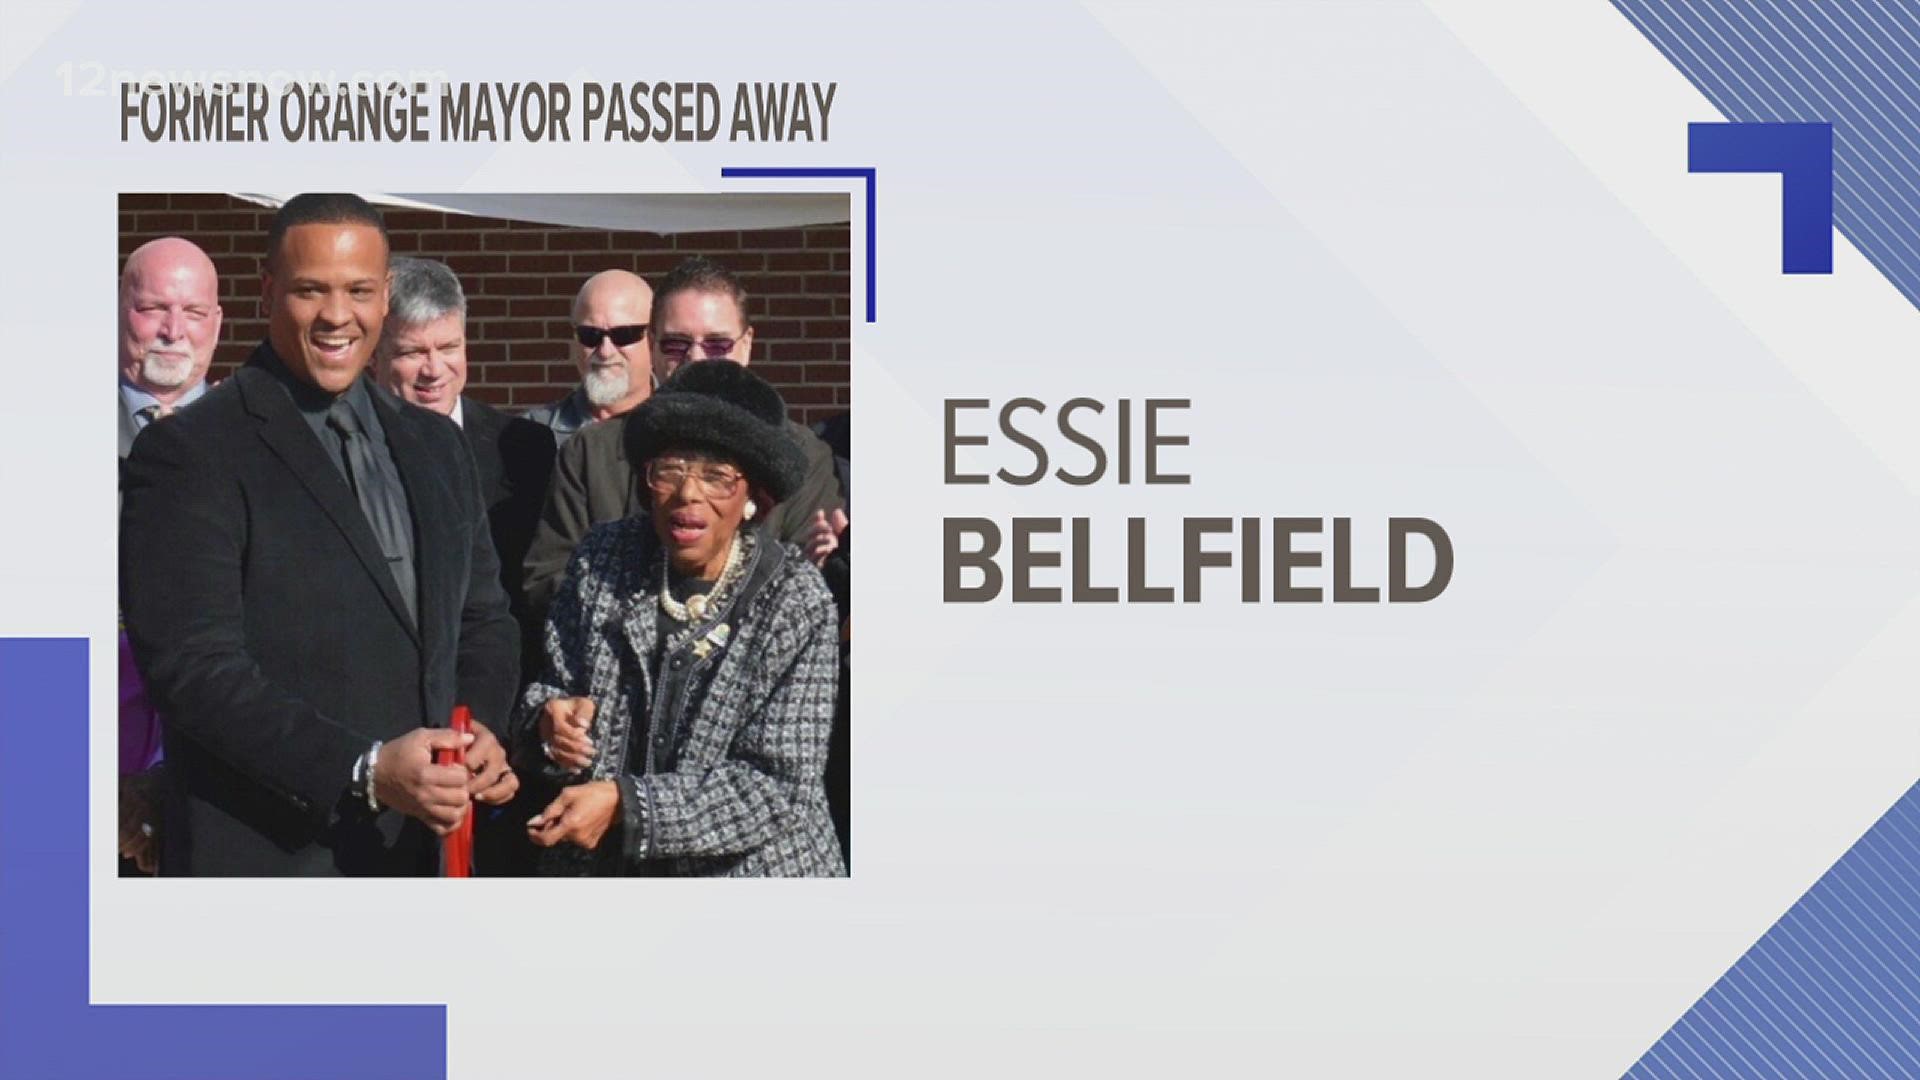 Bellfield was the first Black mayor of Orange and has been the city’s only female mayor.